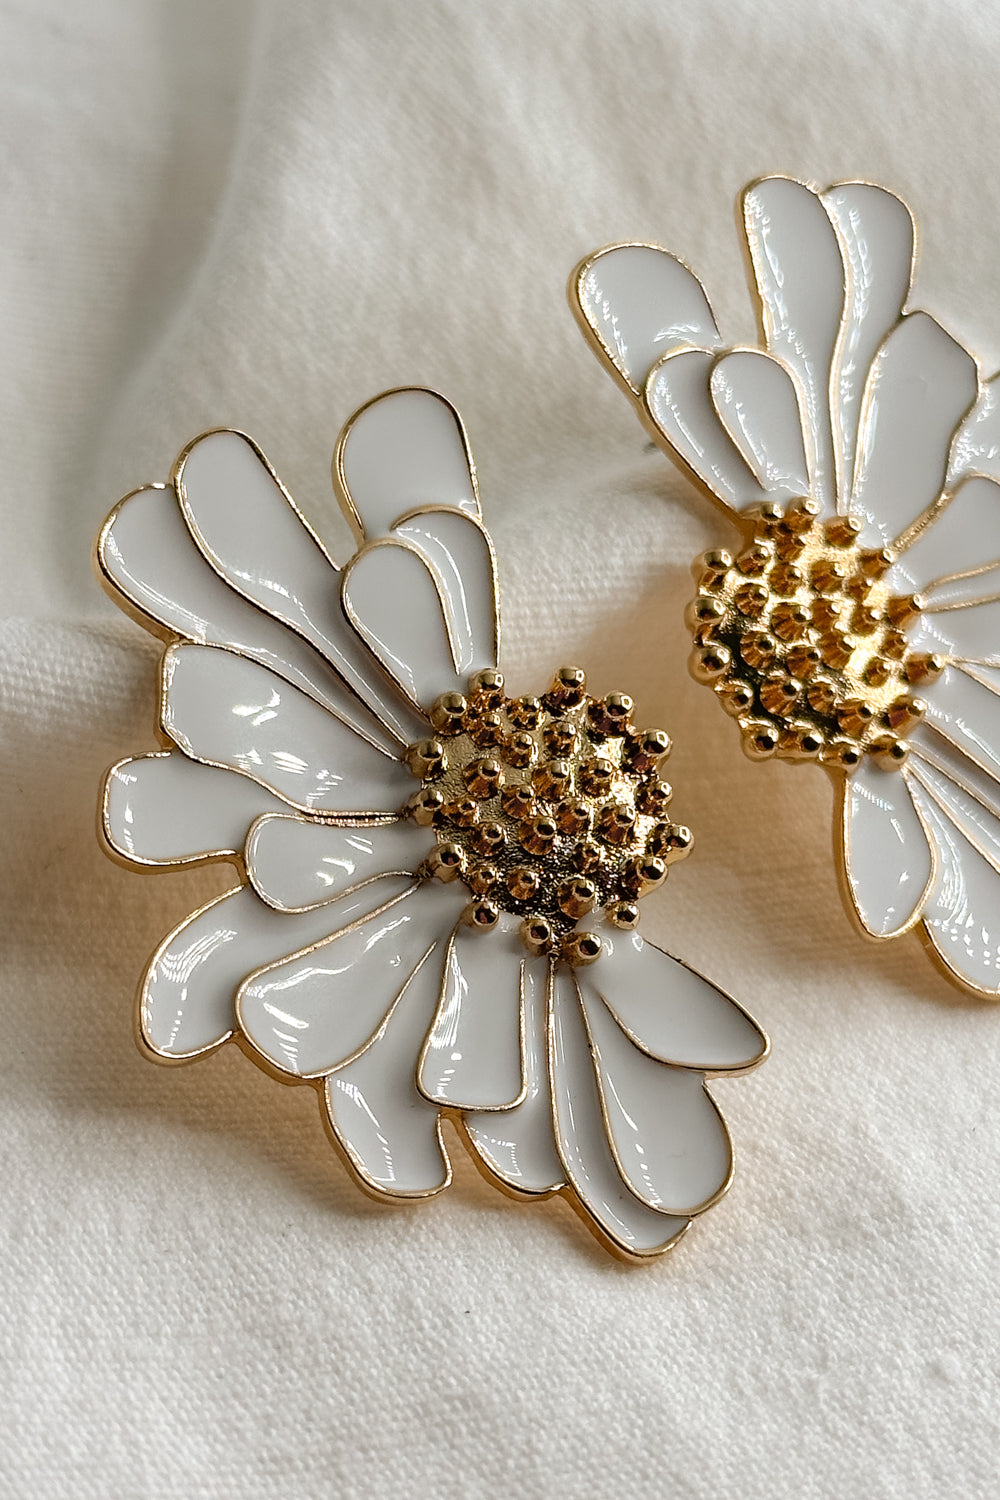 Close up view of the Chloe White & Gold Flower Stud Earring which features oversized white flower studs with gold details